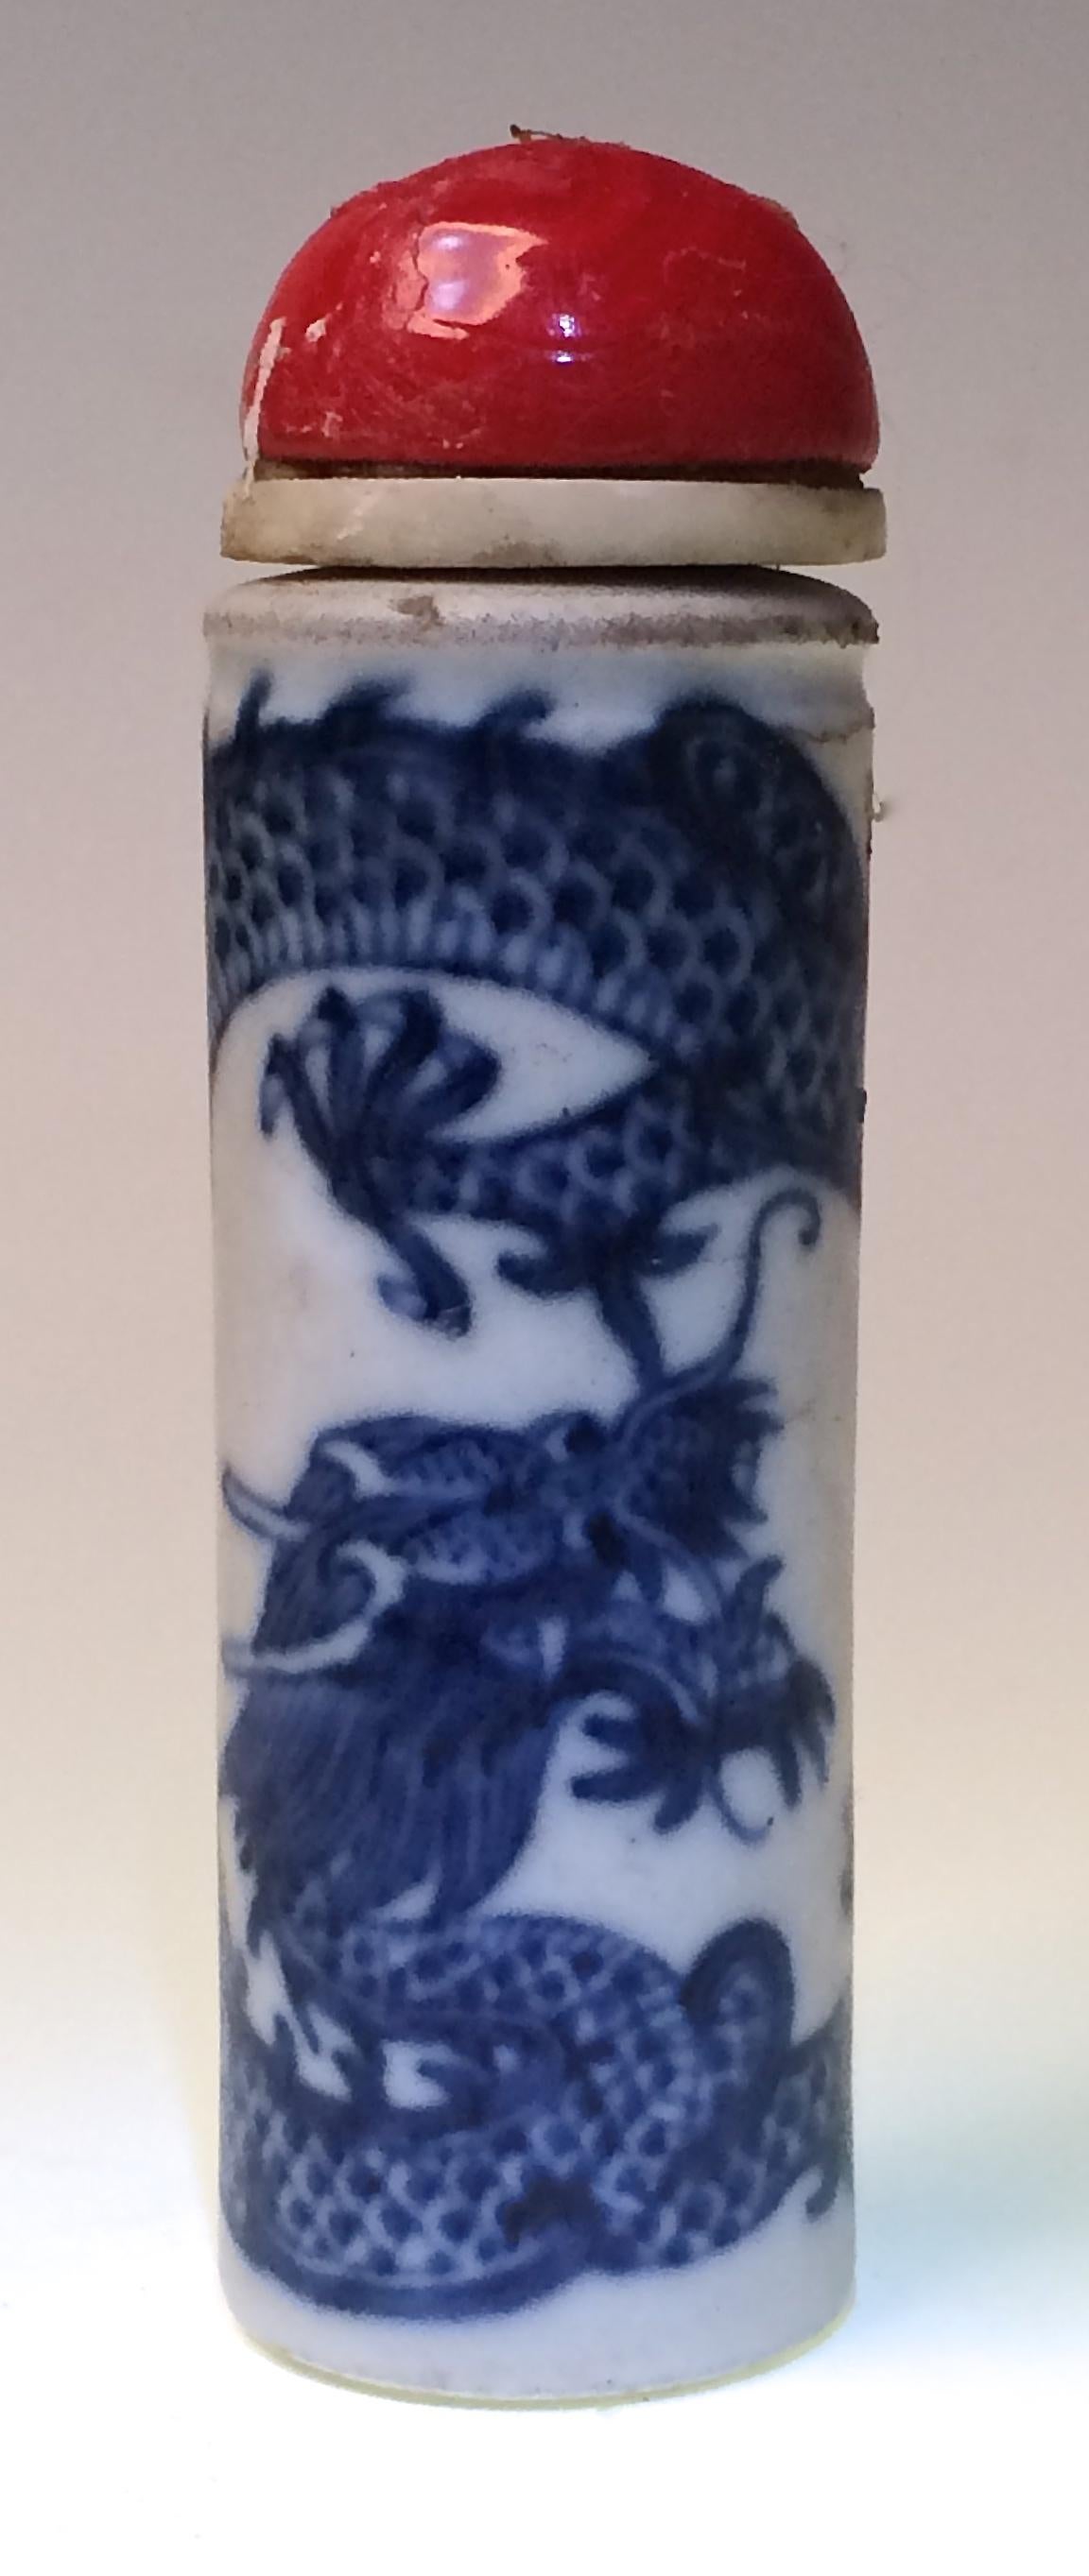 Chinese porcelain dragon snuff bottle, unusual cylindrical pillar form with no neck, unglazed top and bottom concentric grooved base, narrow aperture, painted in under glaze cobalt blue of a single five clawed dragon wrapped around the body chasing